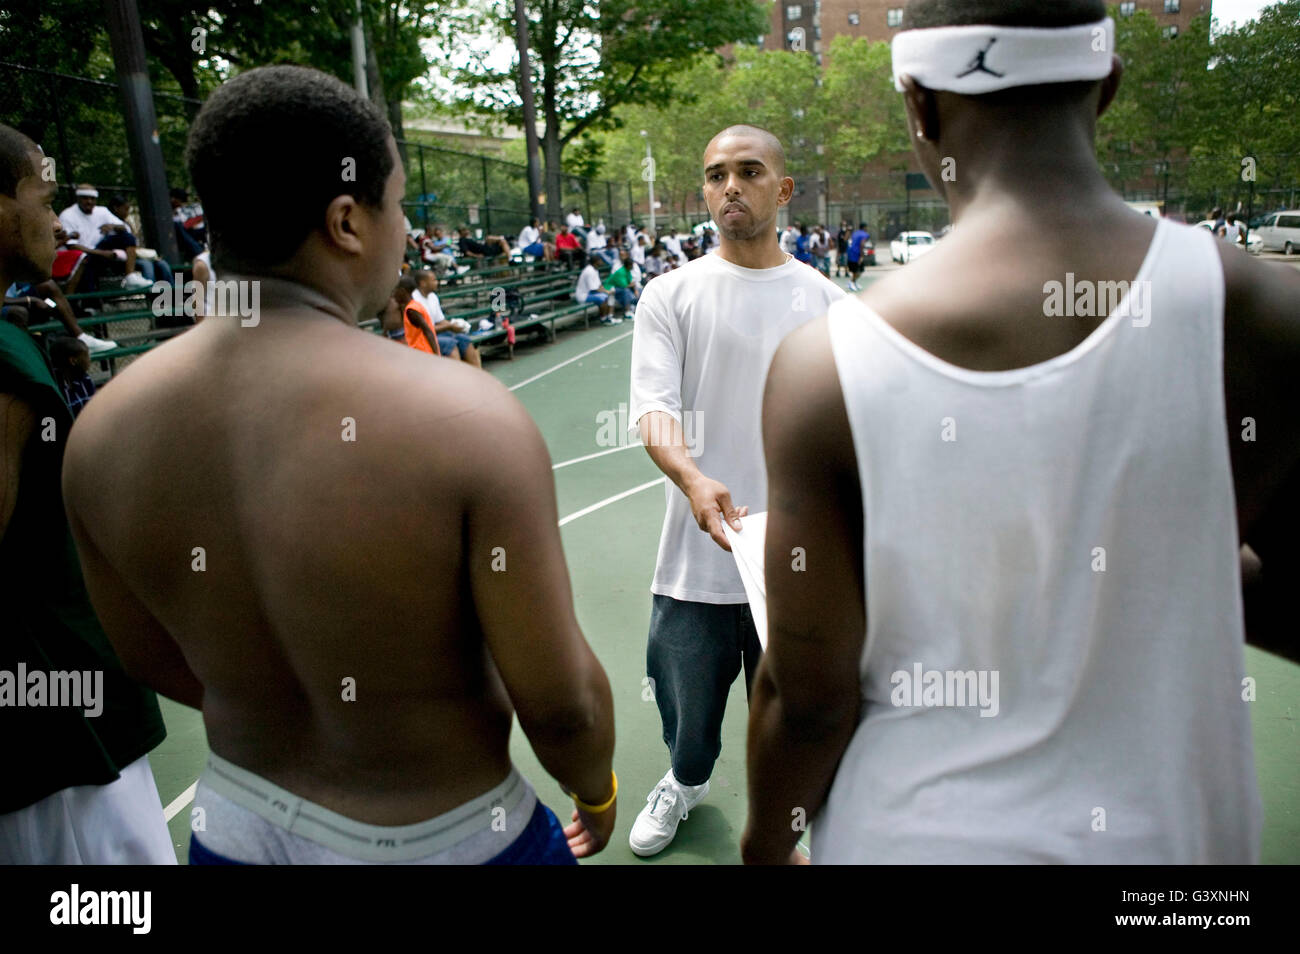 A member of the organizing team picks teams during the Ruckers street basketball tournament tryouts, at Ruckers Park in Harlem, Stock Photo